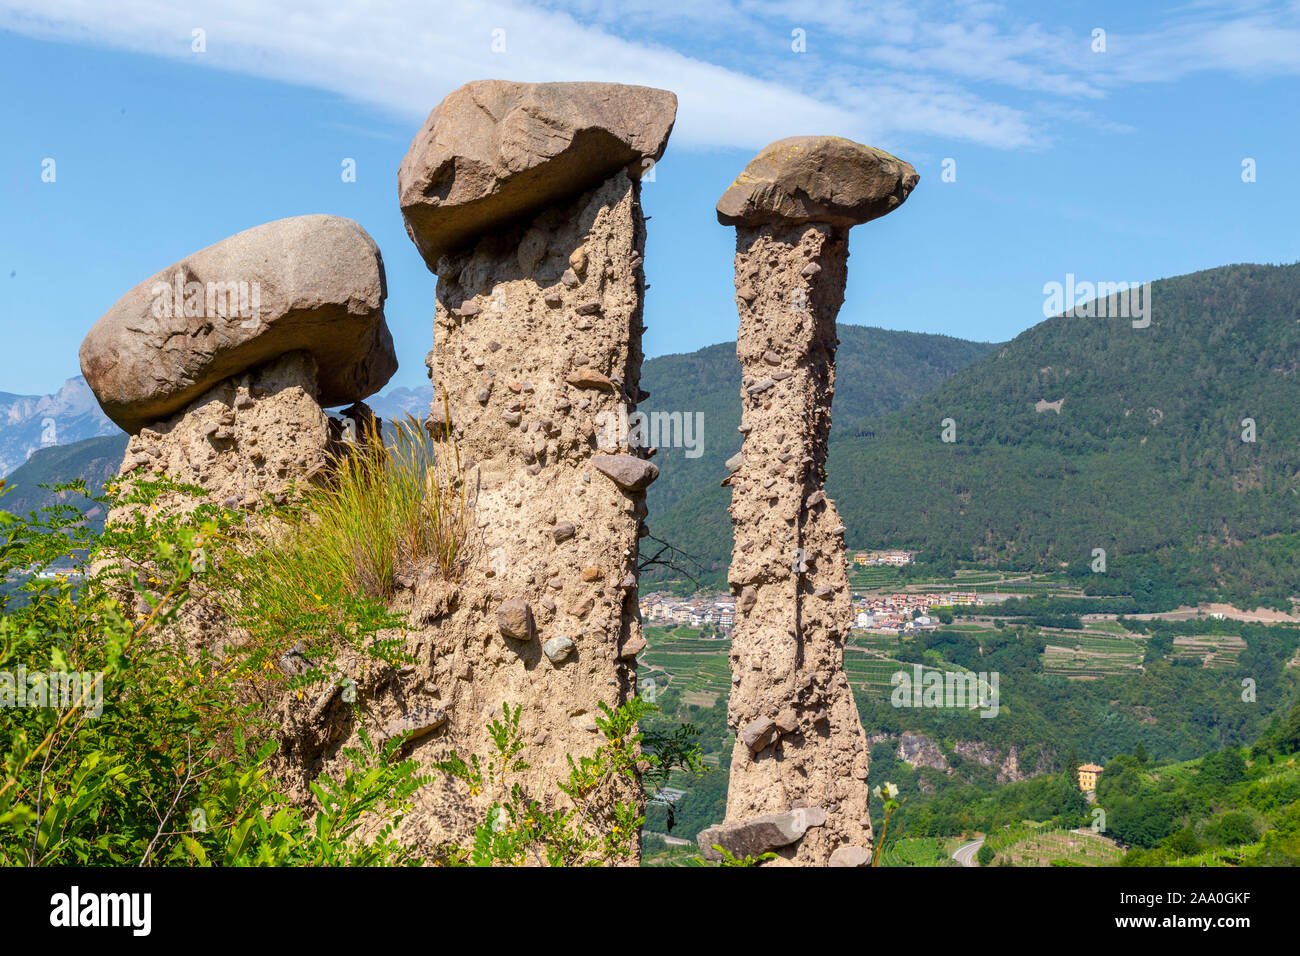 One of the geological attractions of Segonzano are pyramids. These 'pyramids' are actually remains of stoneware pillars that are not affected by erosi Stock Photo